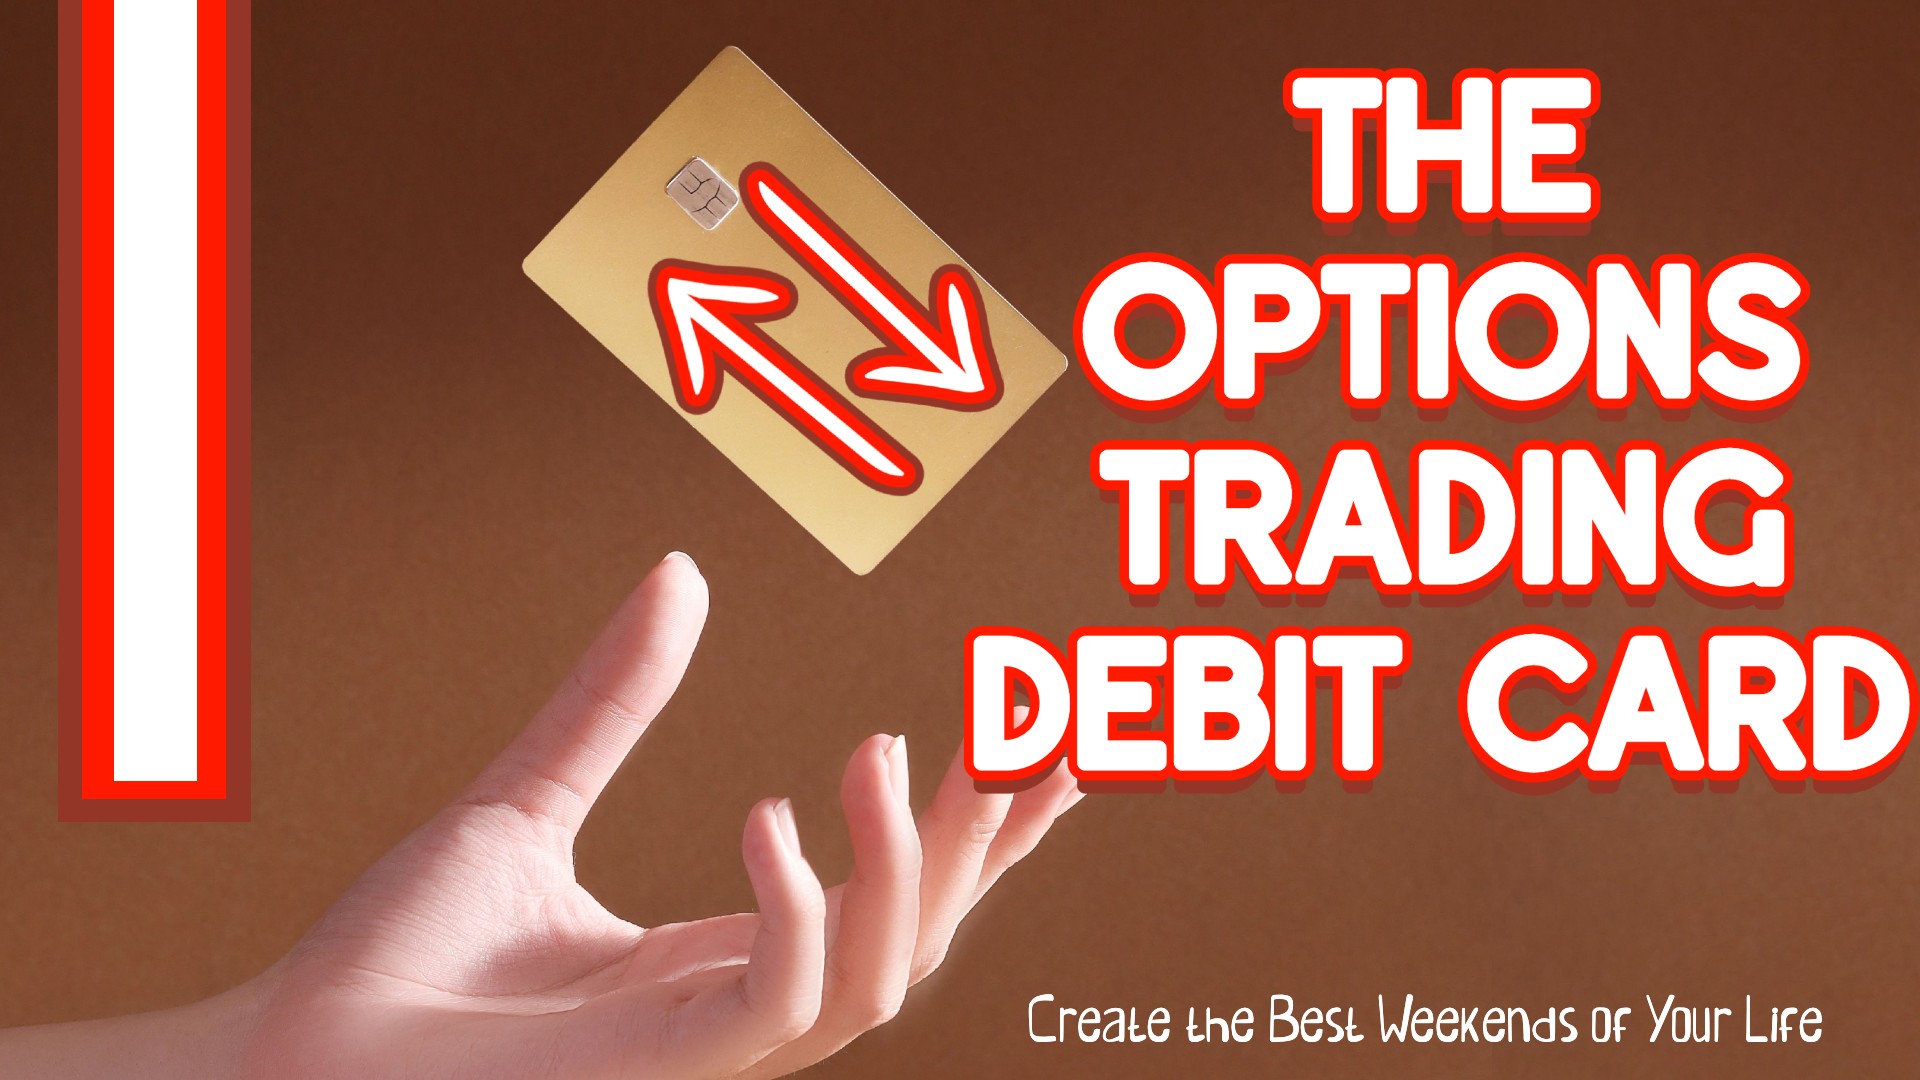 The Options Trading Debit Card: Create the Best Weekends of Your Life